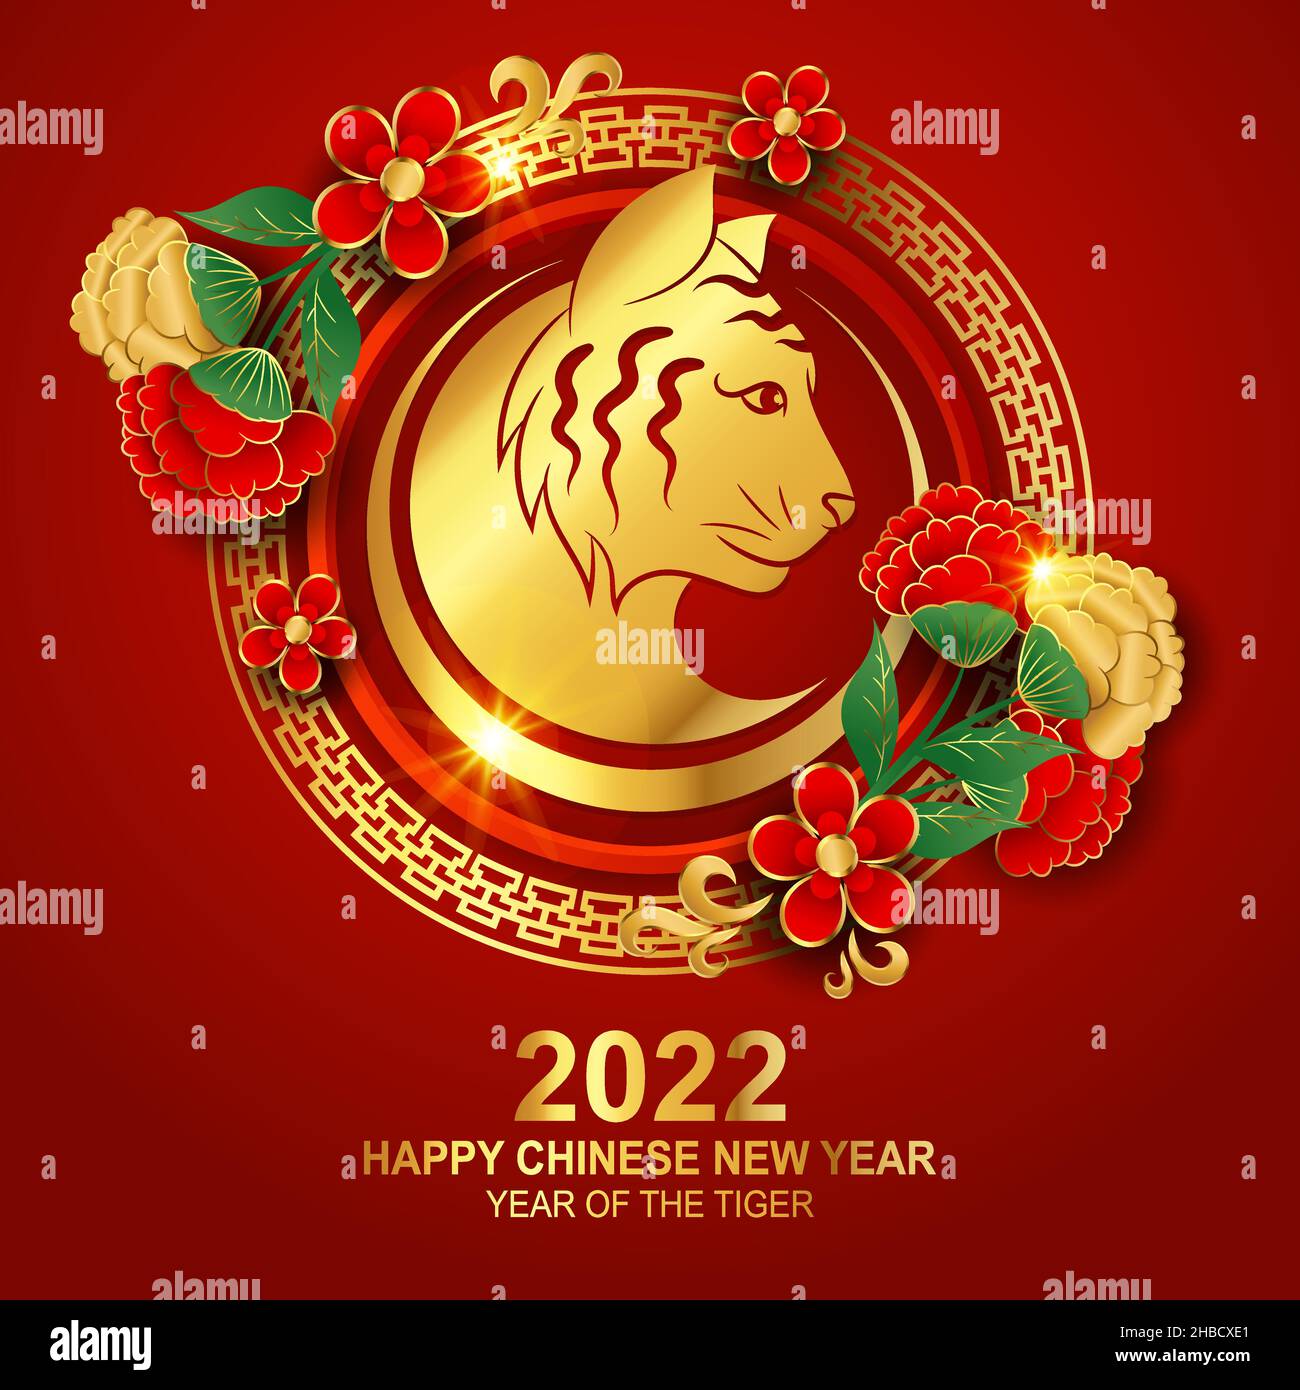 Chinese new year 2022 with golden tiger head and flower badge Stock Vector